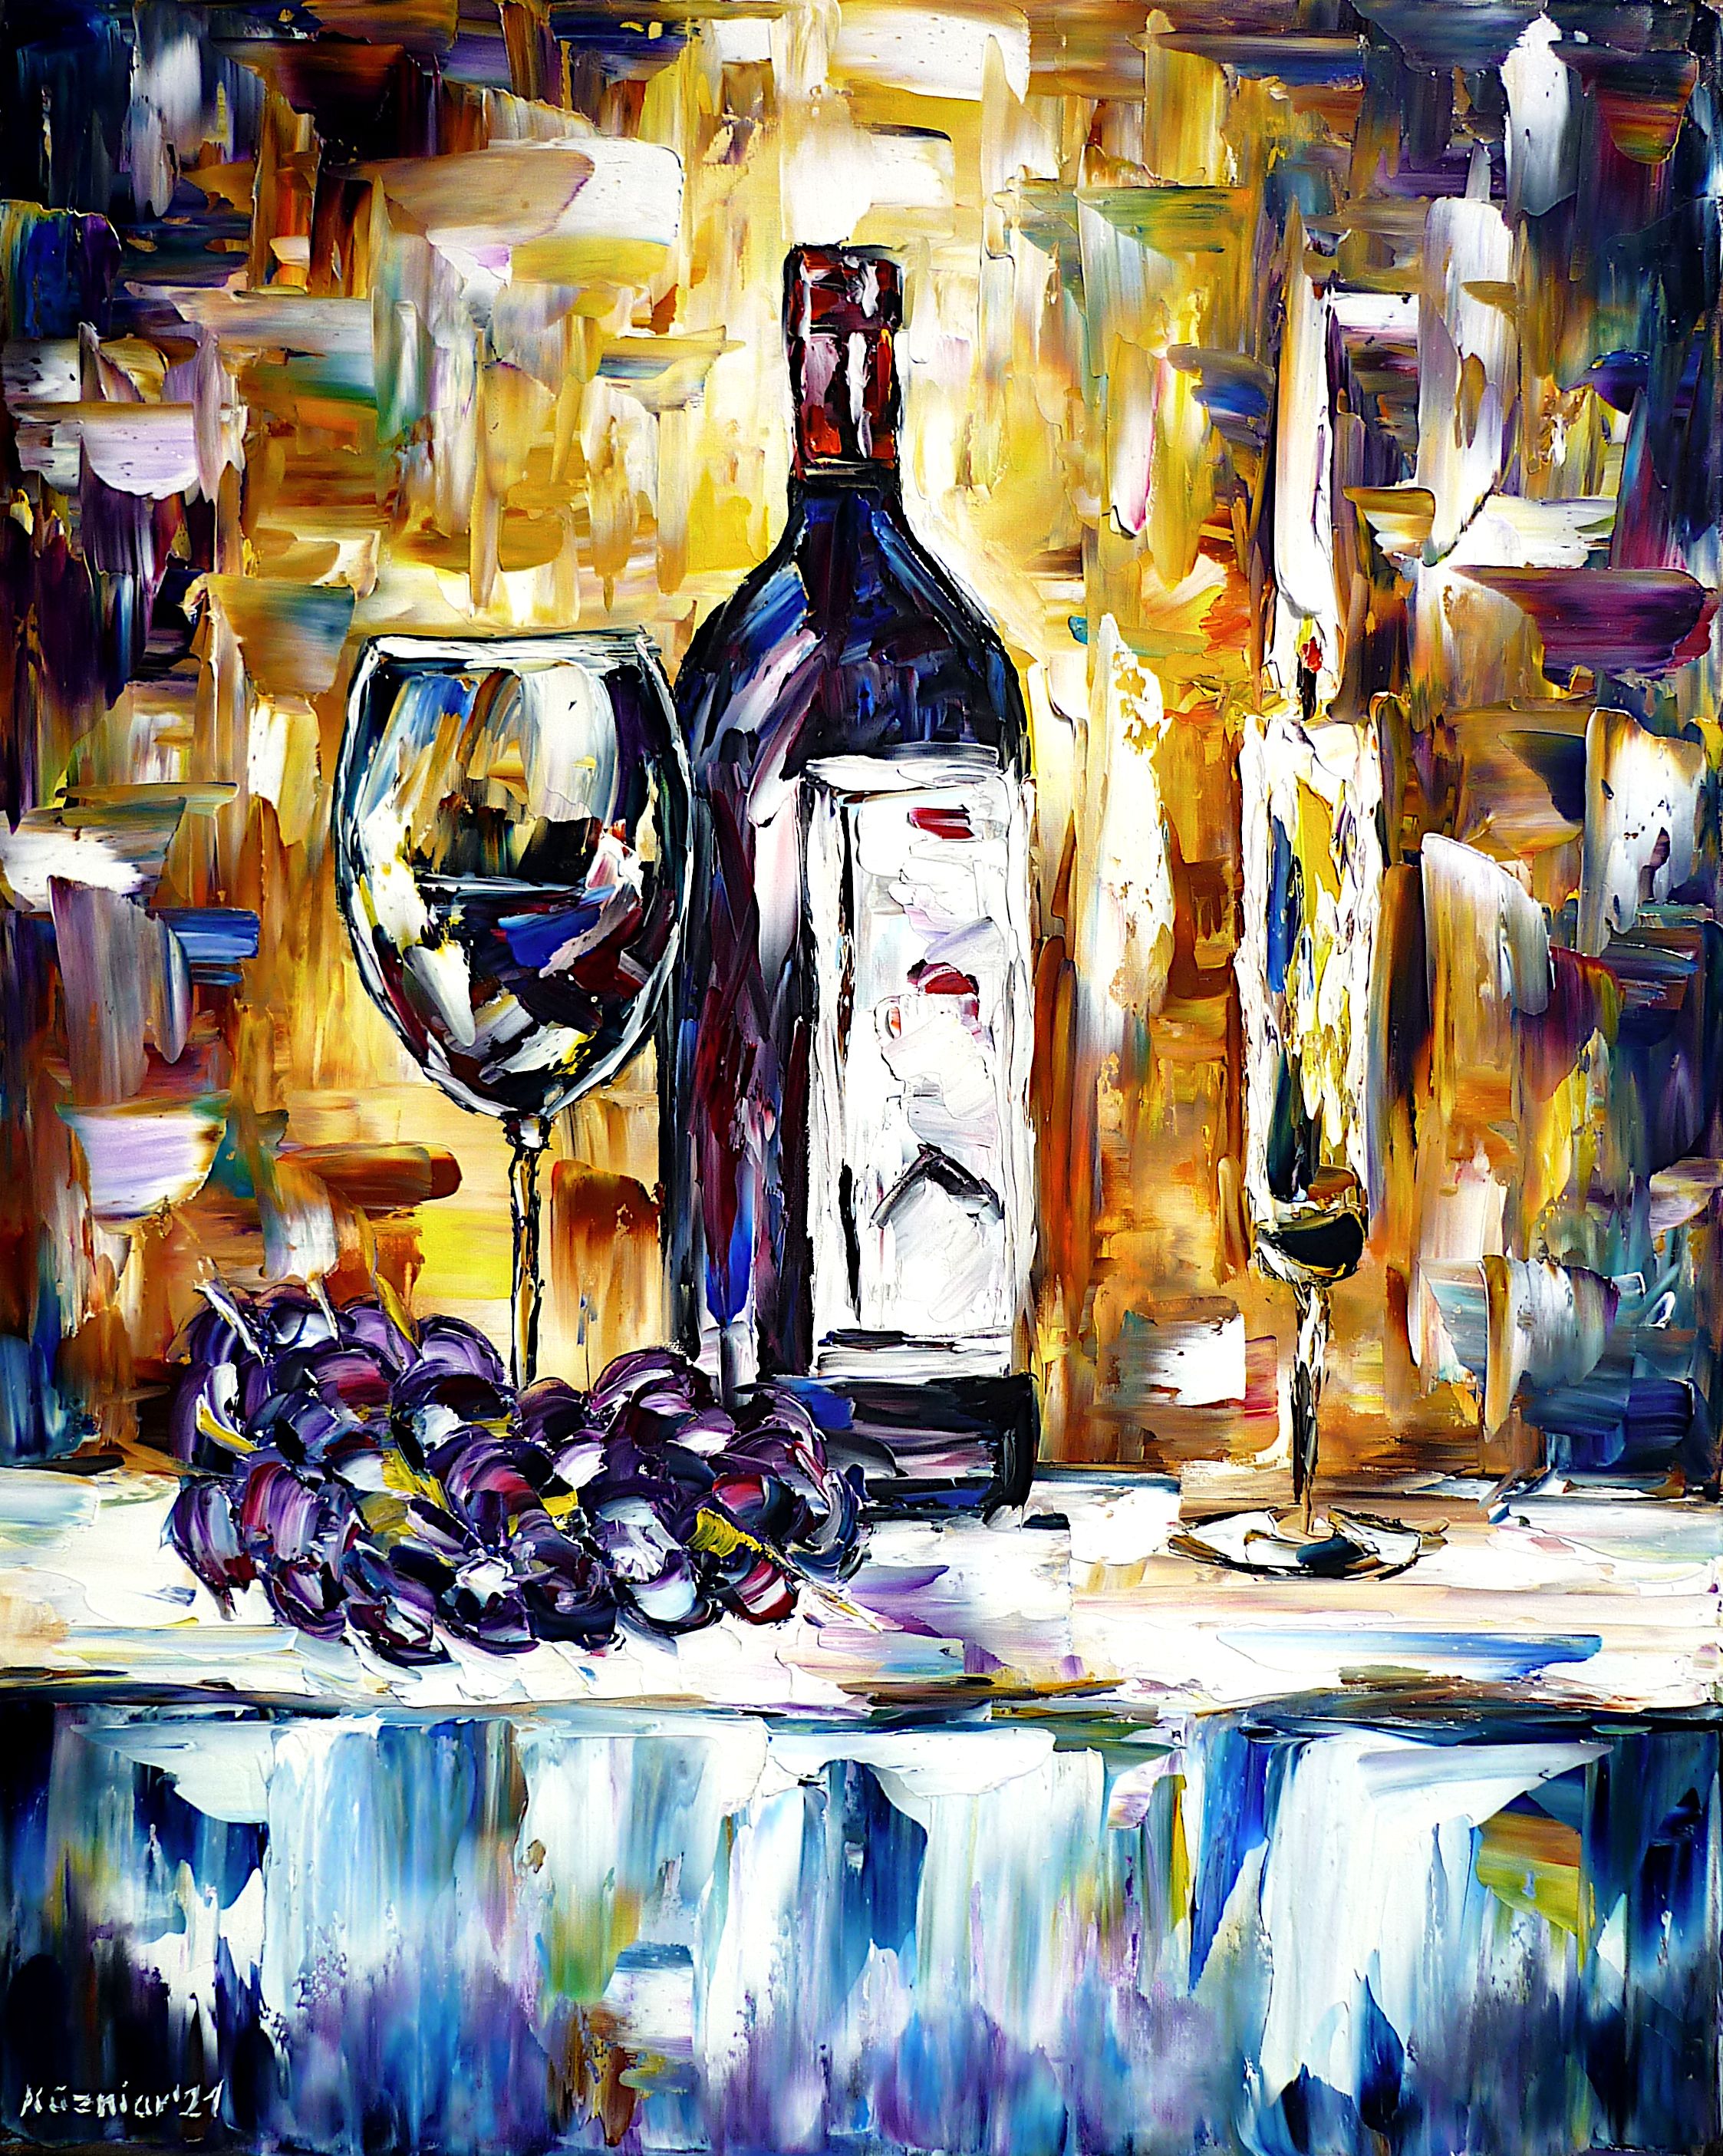 winebottle,bottleofwine,glassofwine,wineglass,winecandlegrapes,darkstilllifepainting,modernstilllife,redwine,alcoholstilllife,colorfulstilllife,grapesonthetable,stilllifewithcandle,stilllifewithwine,candleonthetable,romance,romanticpicture,romanticpainting,winelover,winelove,winepainting,winepicture,Ilovewine,winedrinker,wineconnoisseur,stilllifeabstract,cheerfulpicture,joy,friendlypicture,friendlypainting,peacefulpicture,peacefulpainting,paletteknifeoilpainting,modernart,figurative,impressionism,abstractpainting,livelycolours,colorfulpainting,brightcolors,lightreflections,impastopainting,diningroomart,diningroompicture,diningroompainting